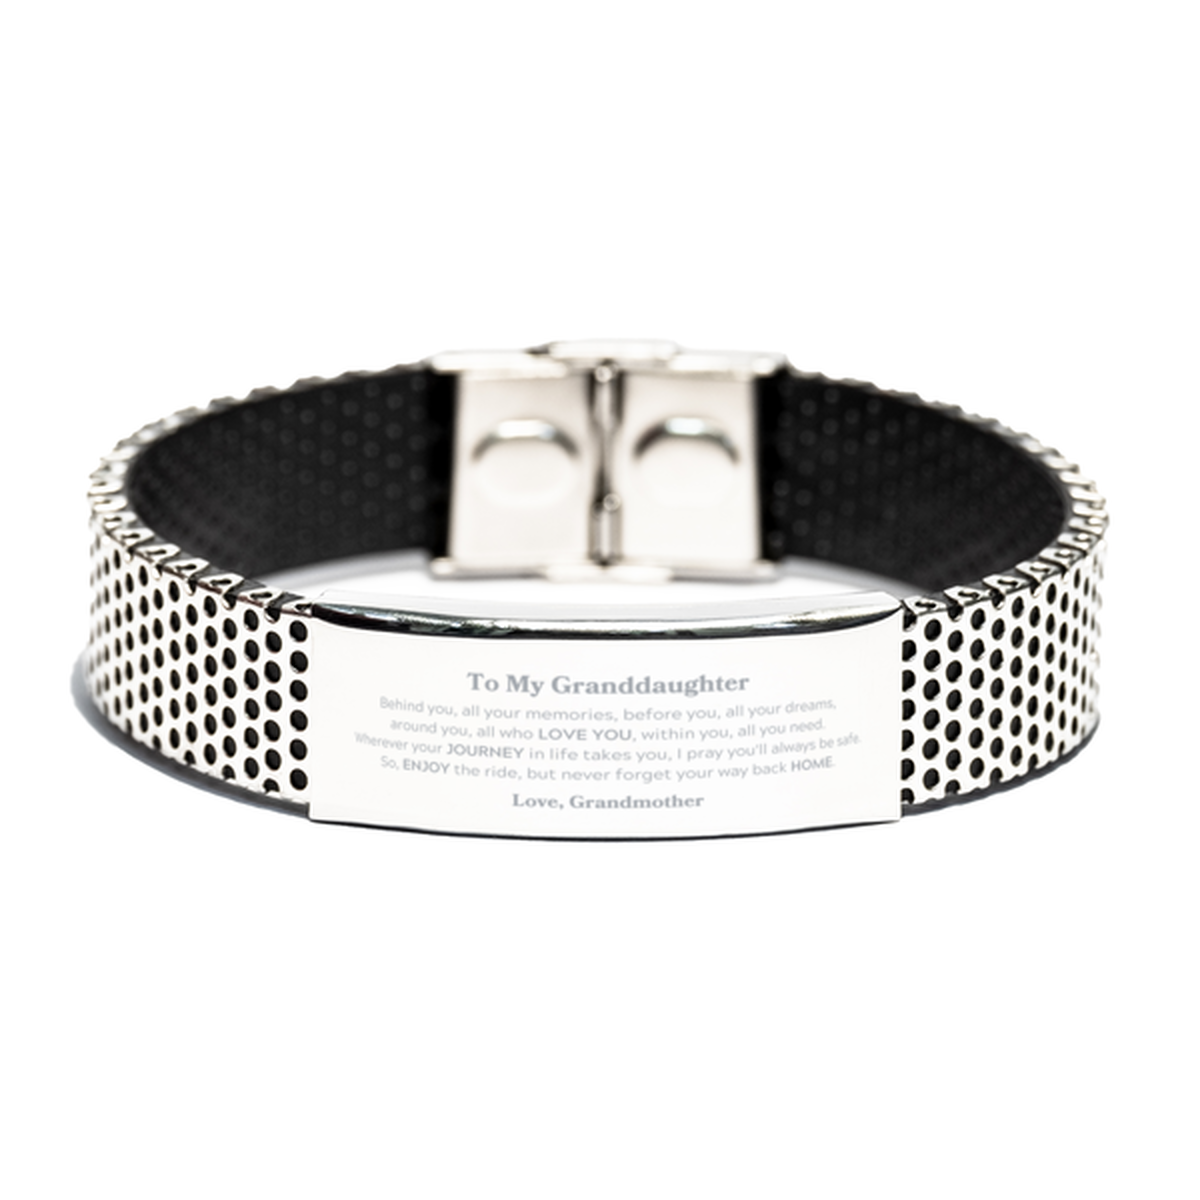 To My Granddaughter Graduation Gifts from Grandmother, Granddaughter Stainless Steel Bracelet Christmas Birthday Gifts for Granddaughter Behind you, all your memories, before you, all your dreams. Love, Grandmother